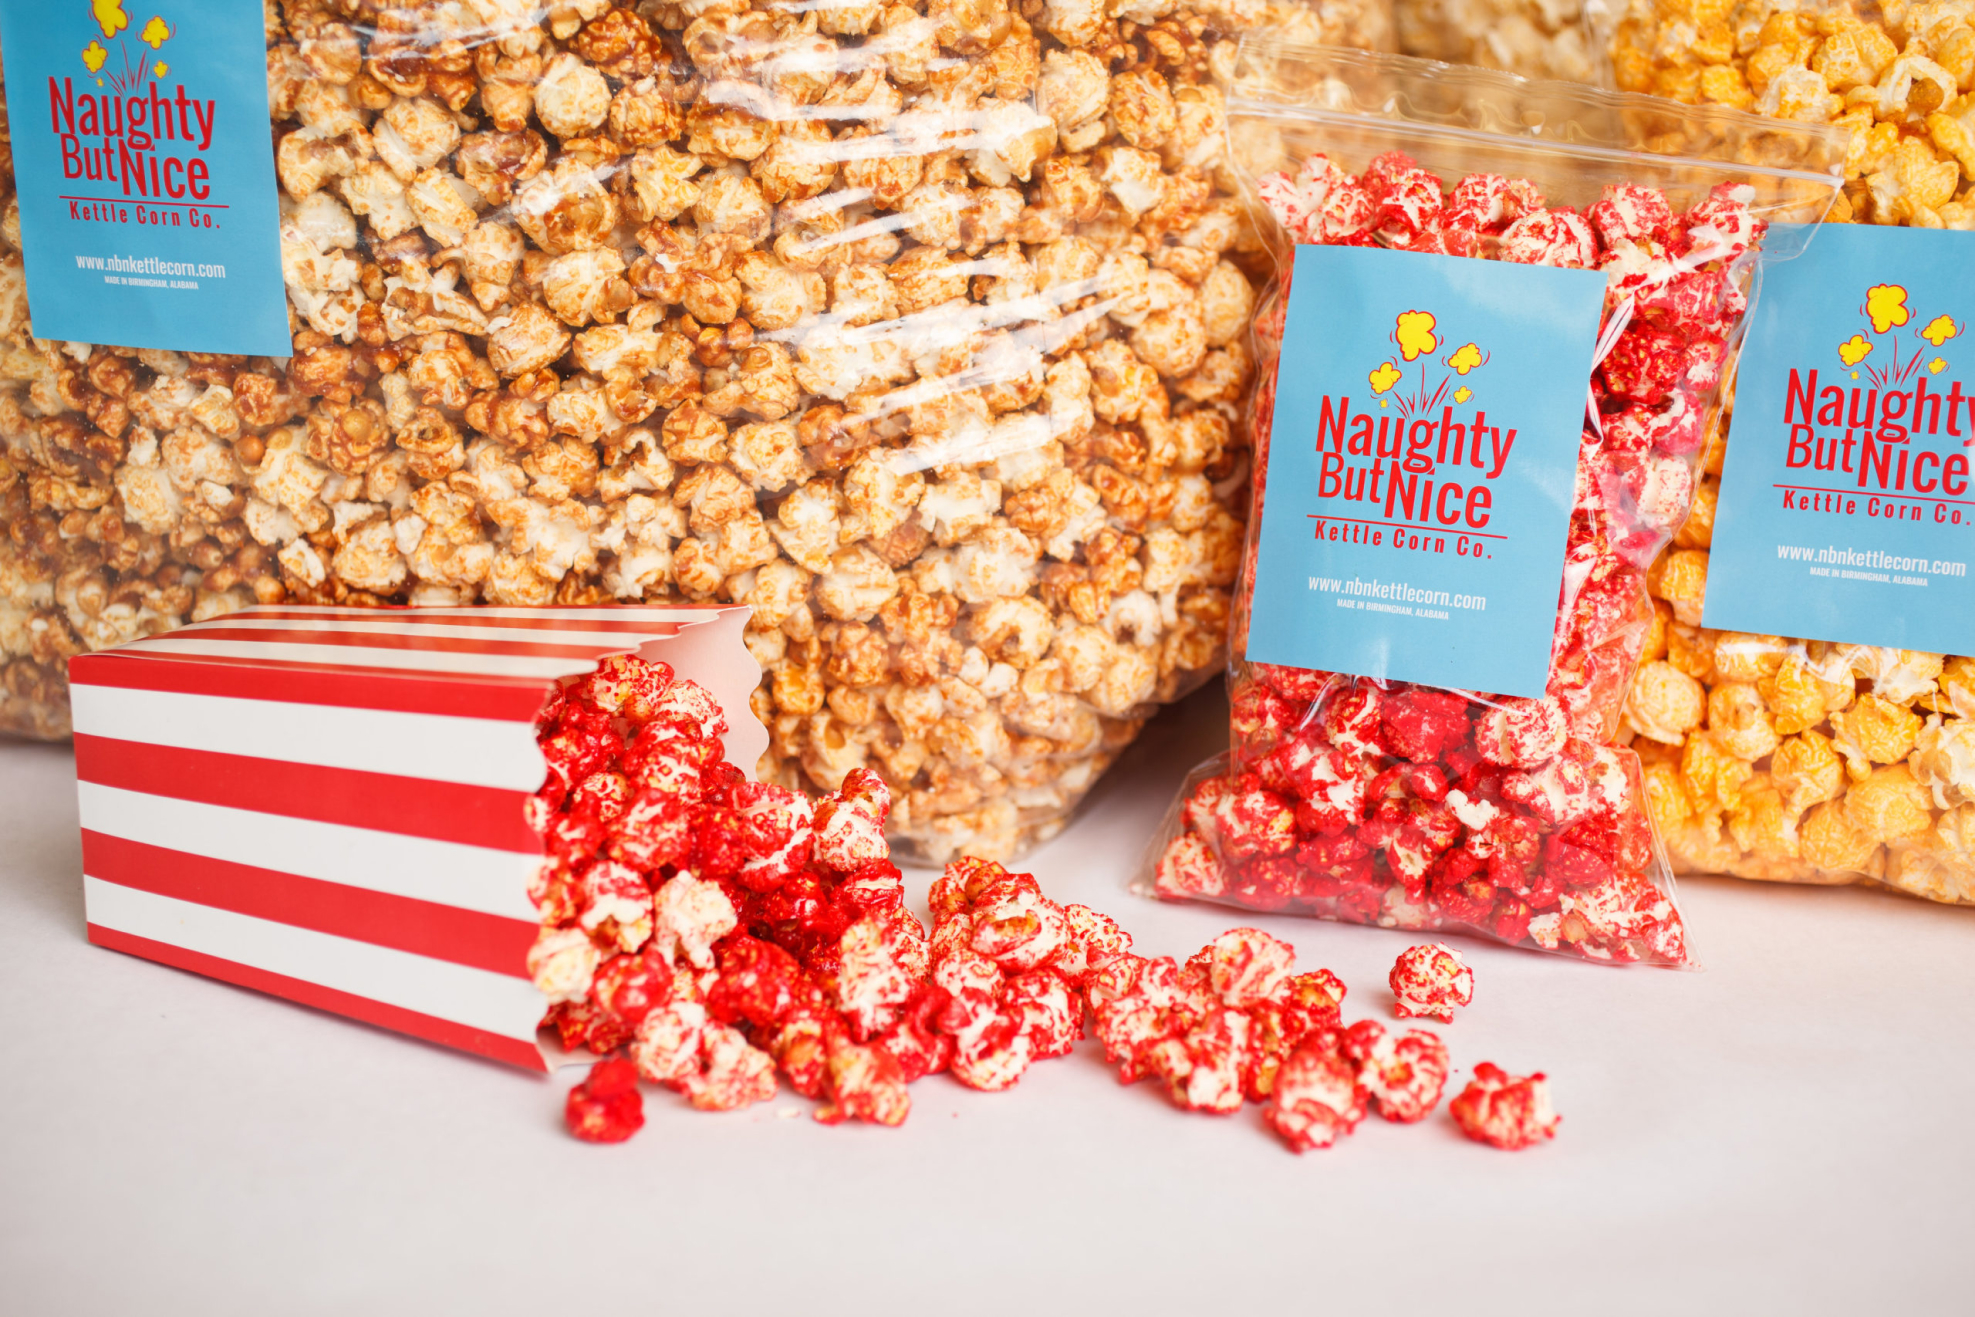 Naughty But Nice Kettle Corn Company showing bags of popcorn spilling out